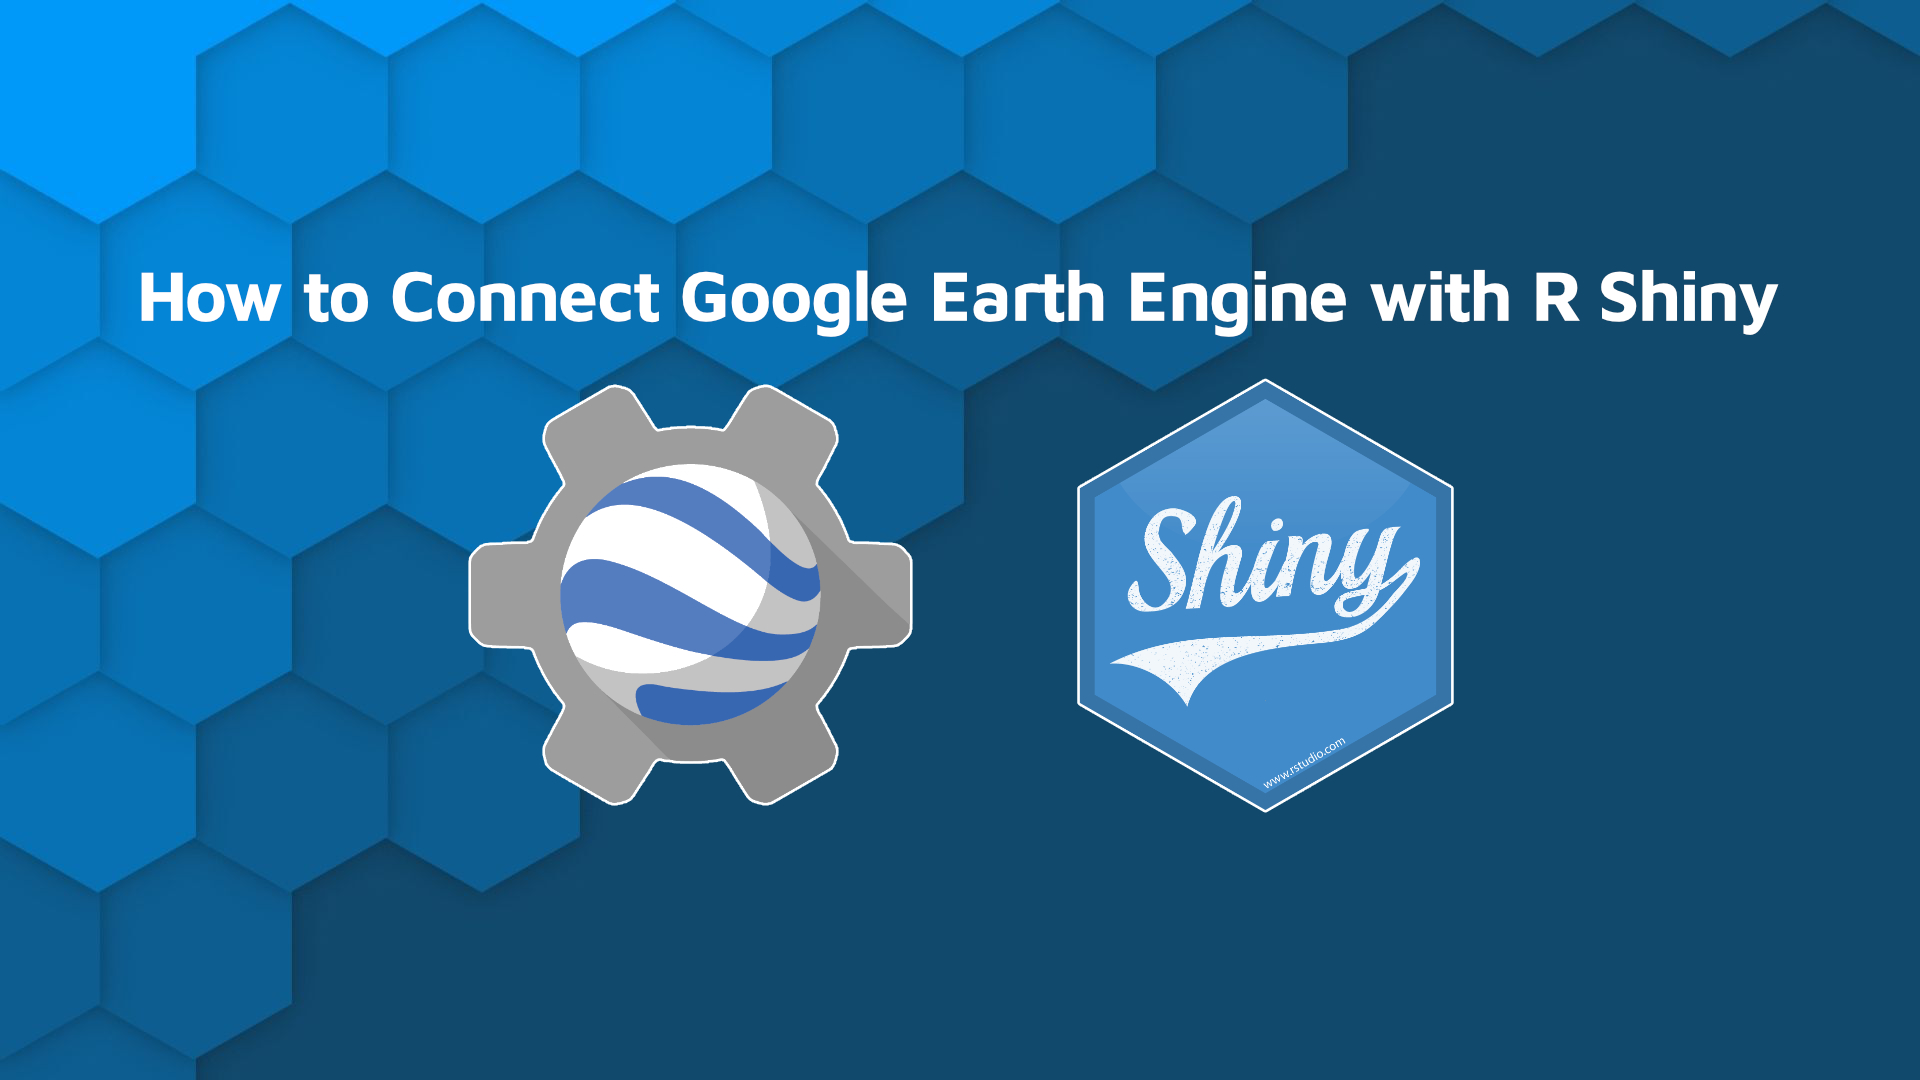 How to Connect Google Earth Engine with R Shiny